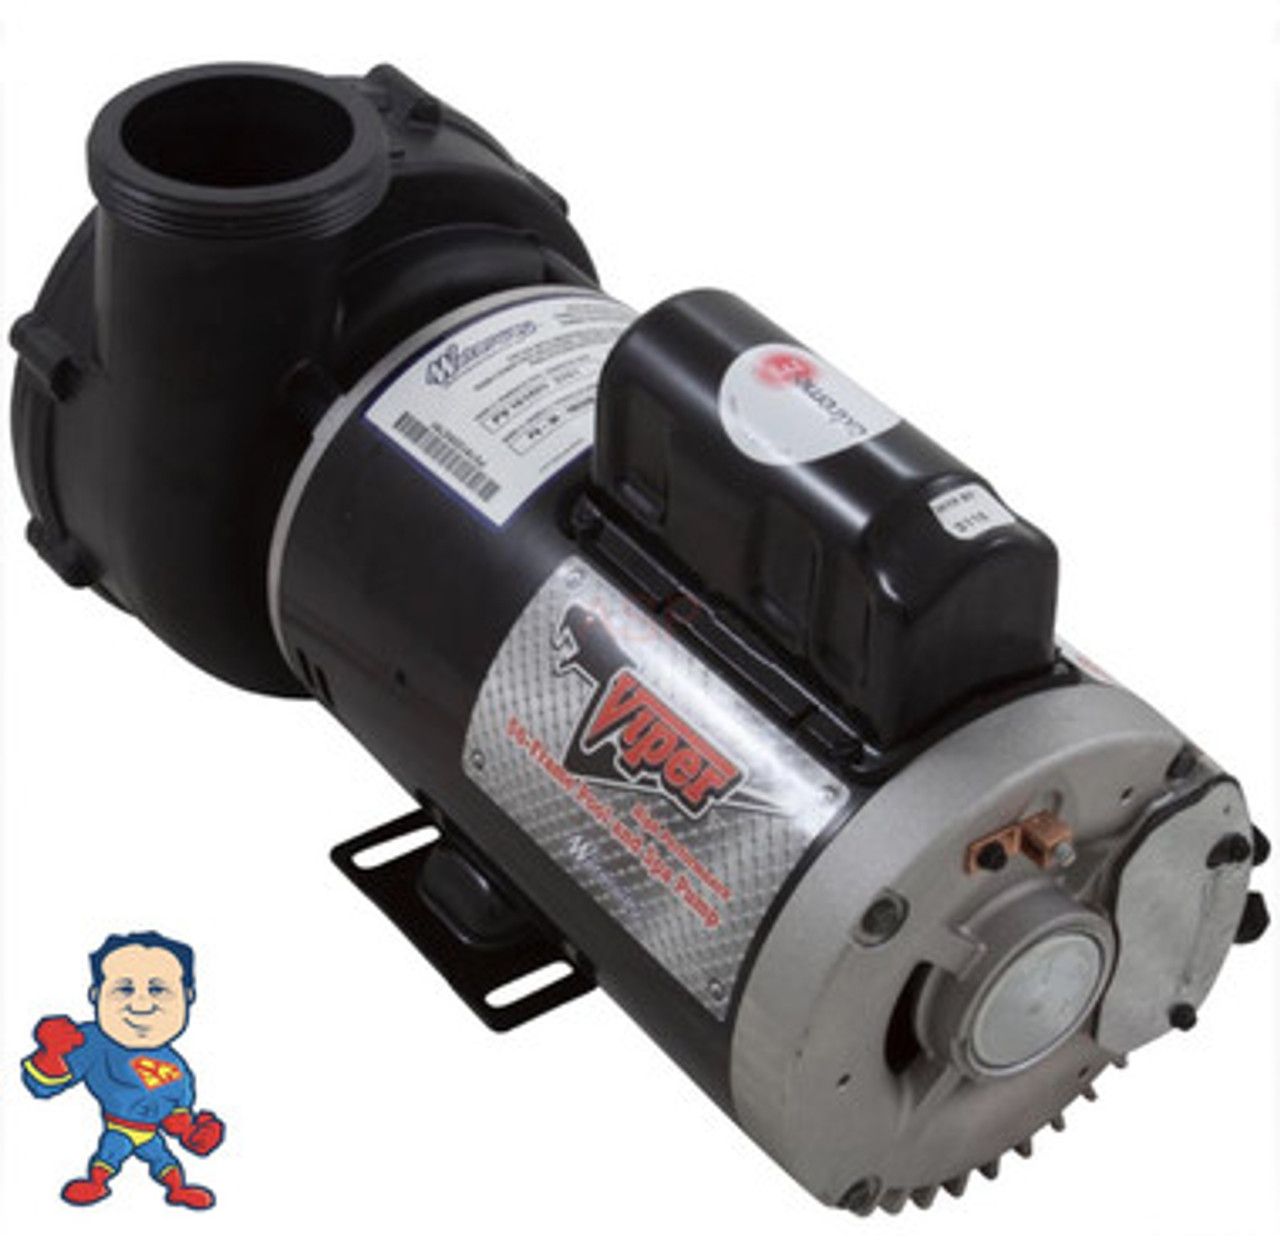 Pump, Waterway Viper, 5.0hp, 230v, 2-spd, 56fr, 2-1/2" x 2-1/2"", OEM
The measurement from the edge of the thread to the edge of the thread on the Suction and Pressure side is 3 11/16"..